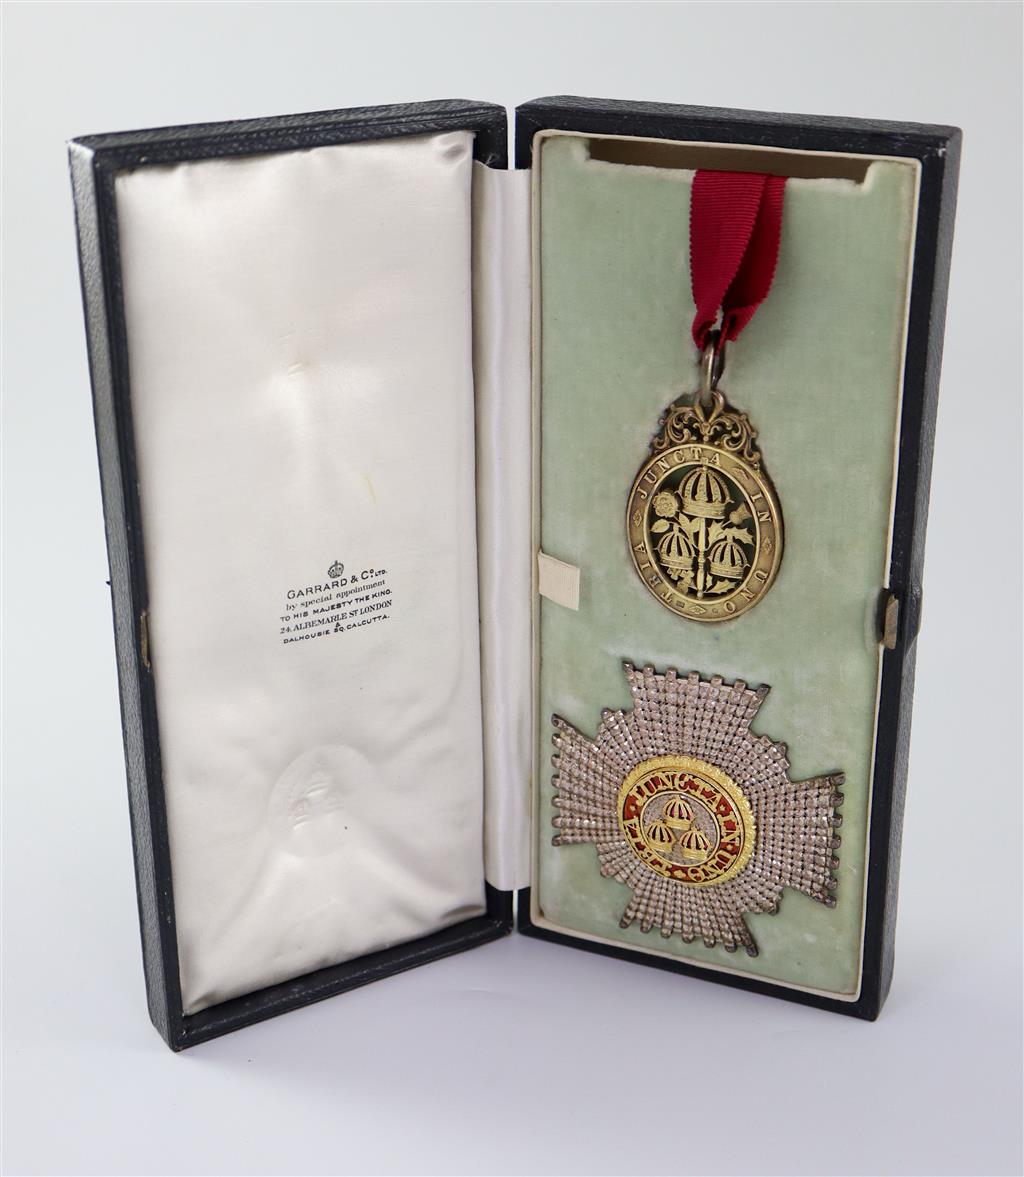 A Civilian Knight Commanders Order of the Bath (KCB) star and sash badge,